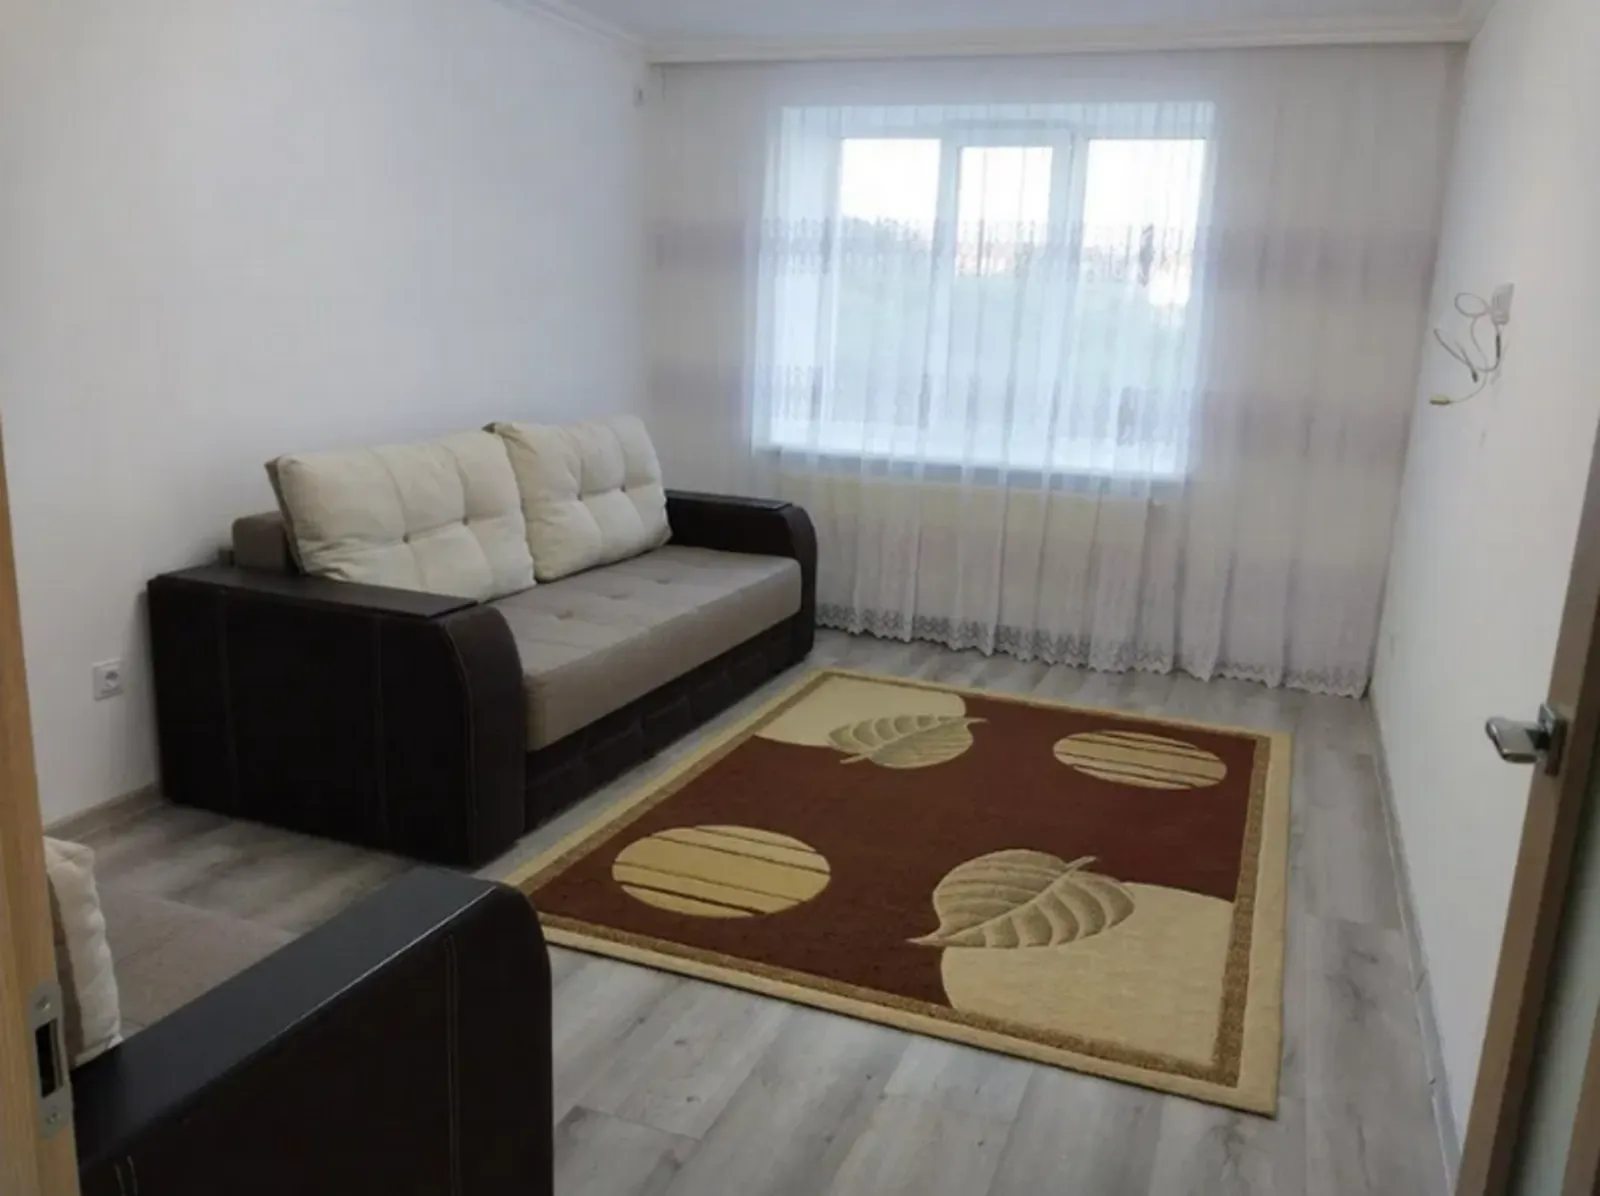 Apartment for rent. 44 m², 2nd floor/10 floors. Severnyy, Ternopil. 